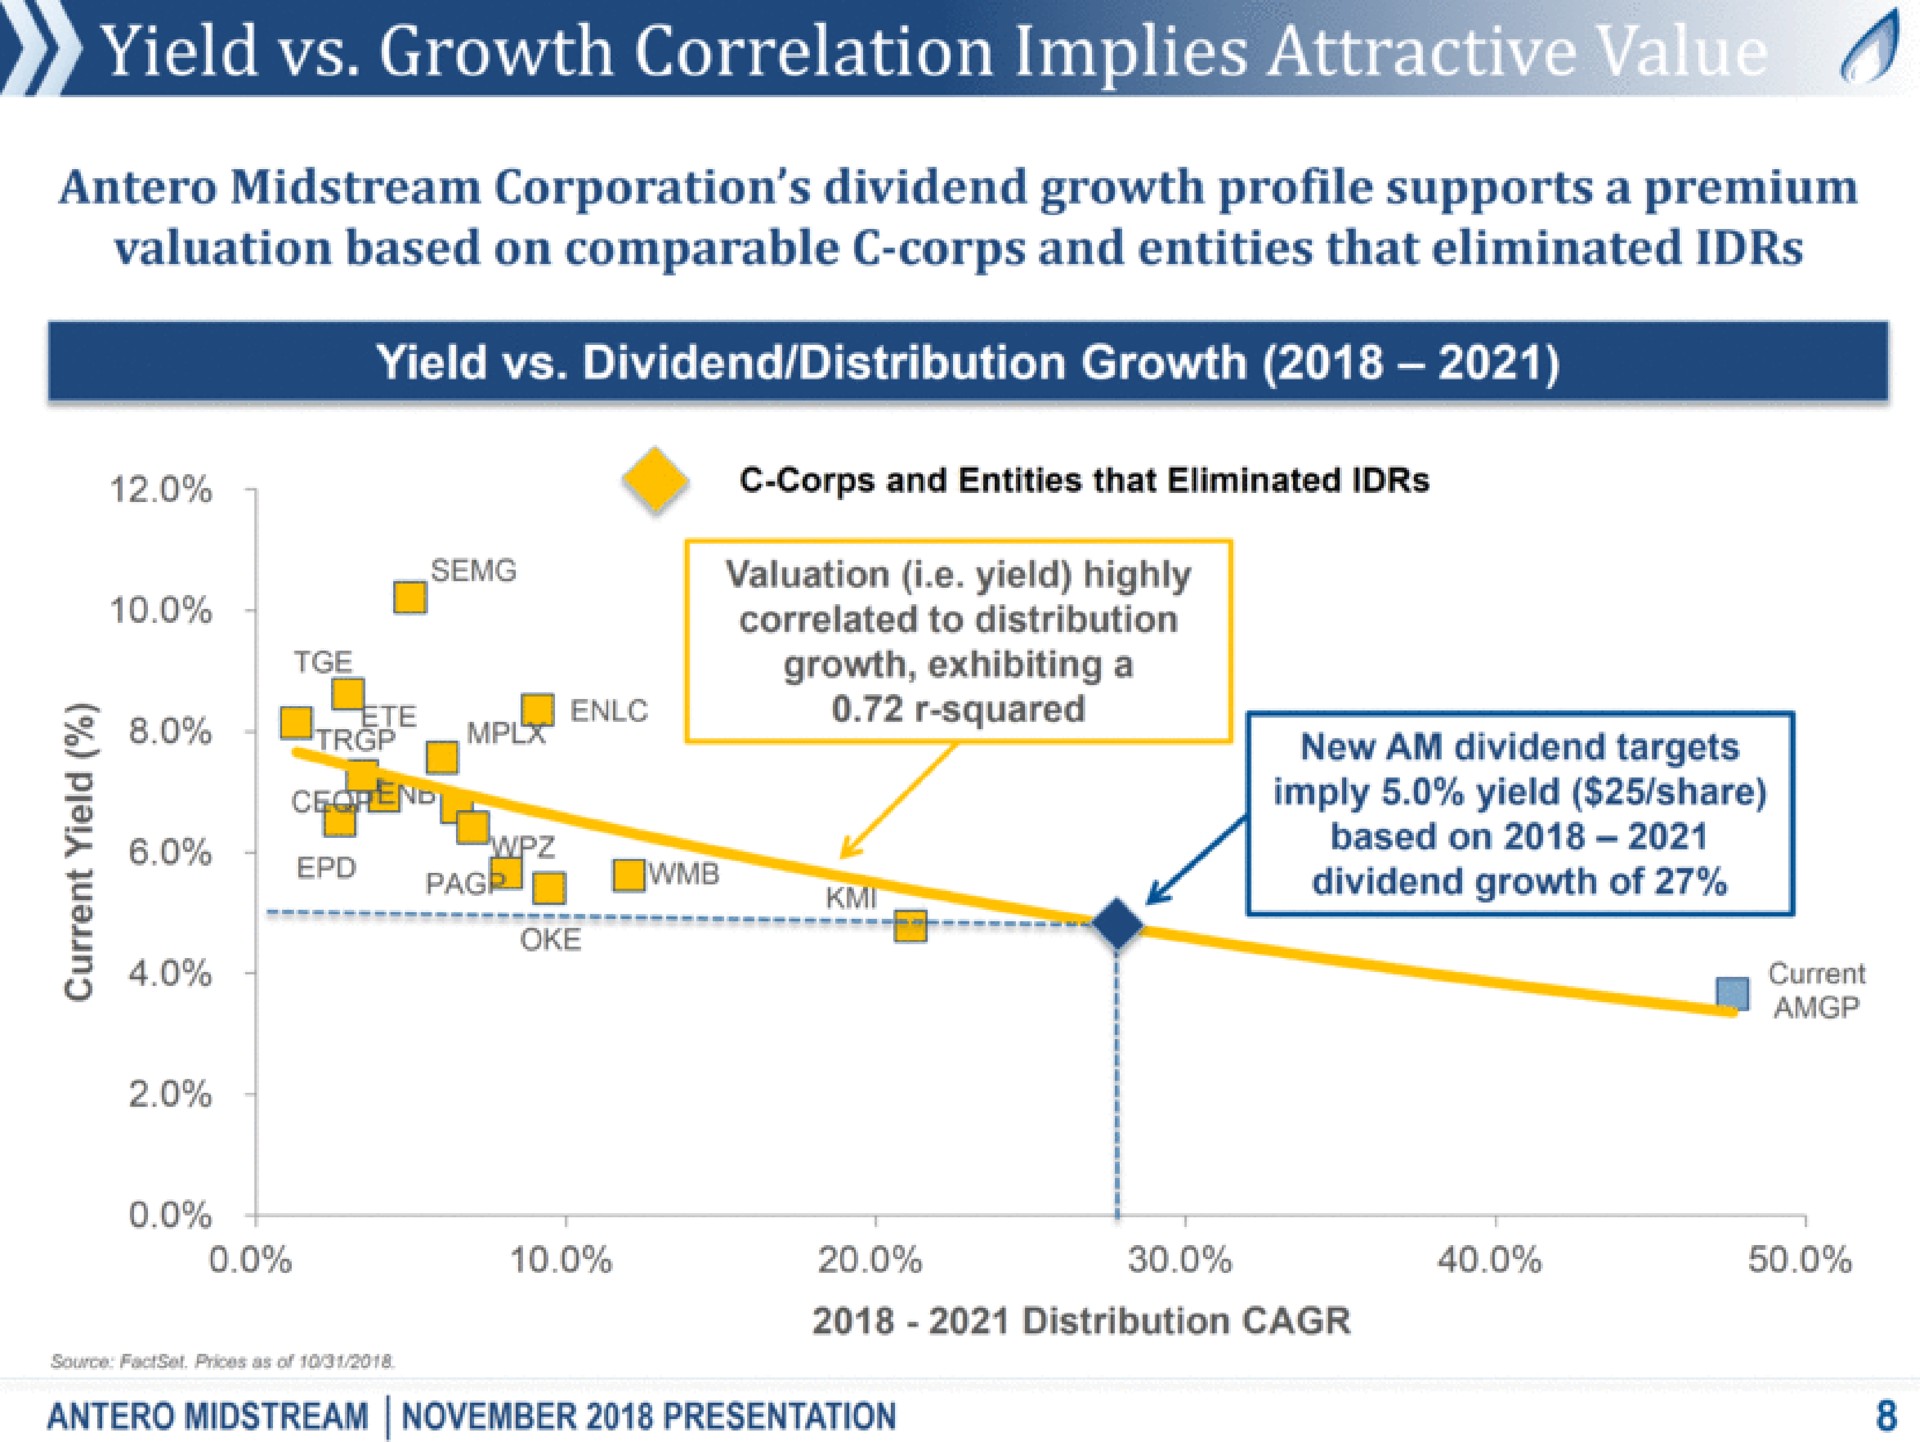 yield growth correlation implies midstream corporation dividend growth profile supports a premium valuation based on comparable corps and entities that eliminated yield dividend distribution growth corps and entities that eliminated am grr hale valuation i yield highly correlated to distribution growth exhibiting a squared i new am dividend targets imply yield share i i based on dividend growth of current a distribution prices as of midstream presentation | Antero Midstream Partners